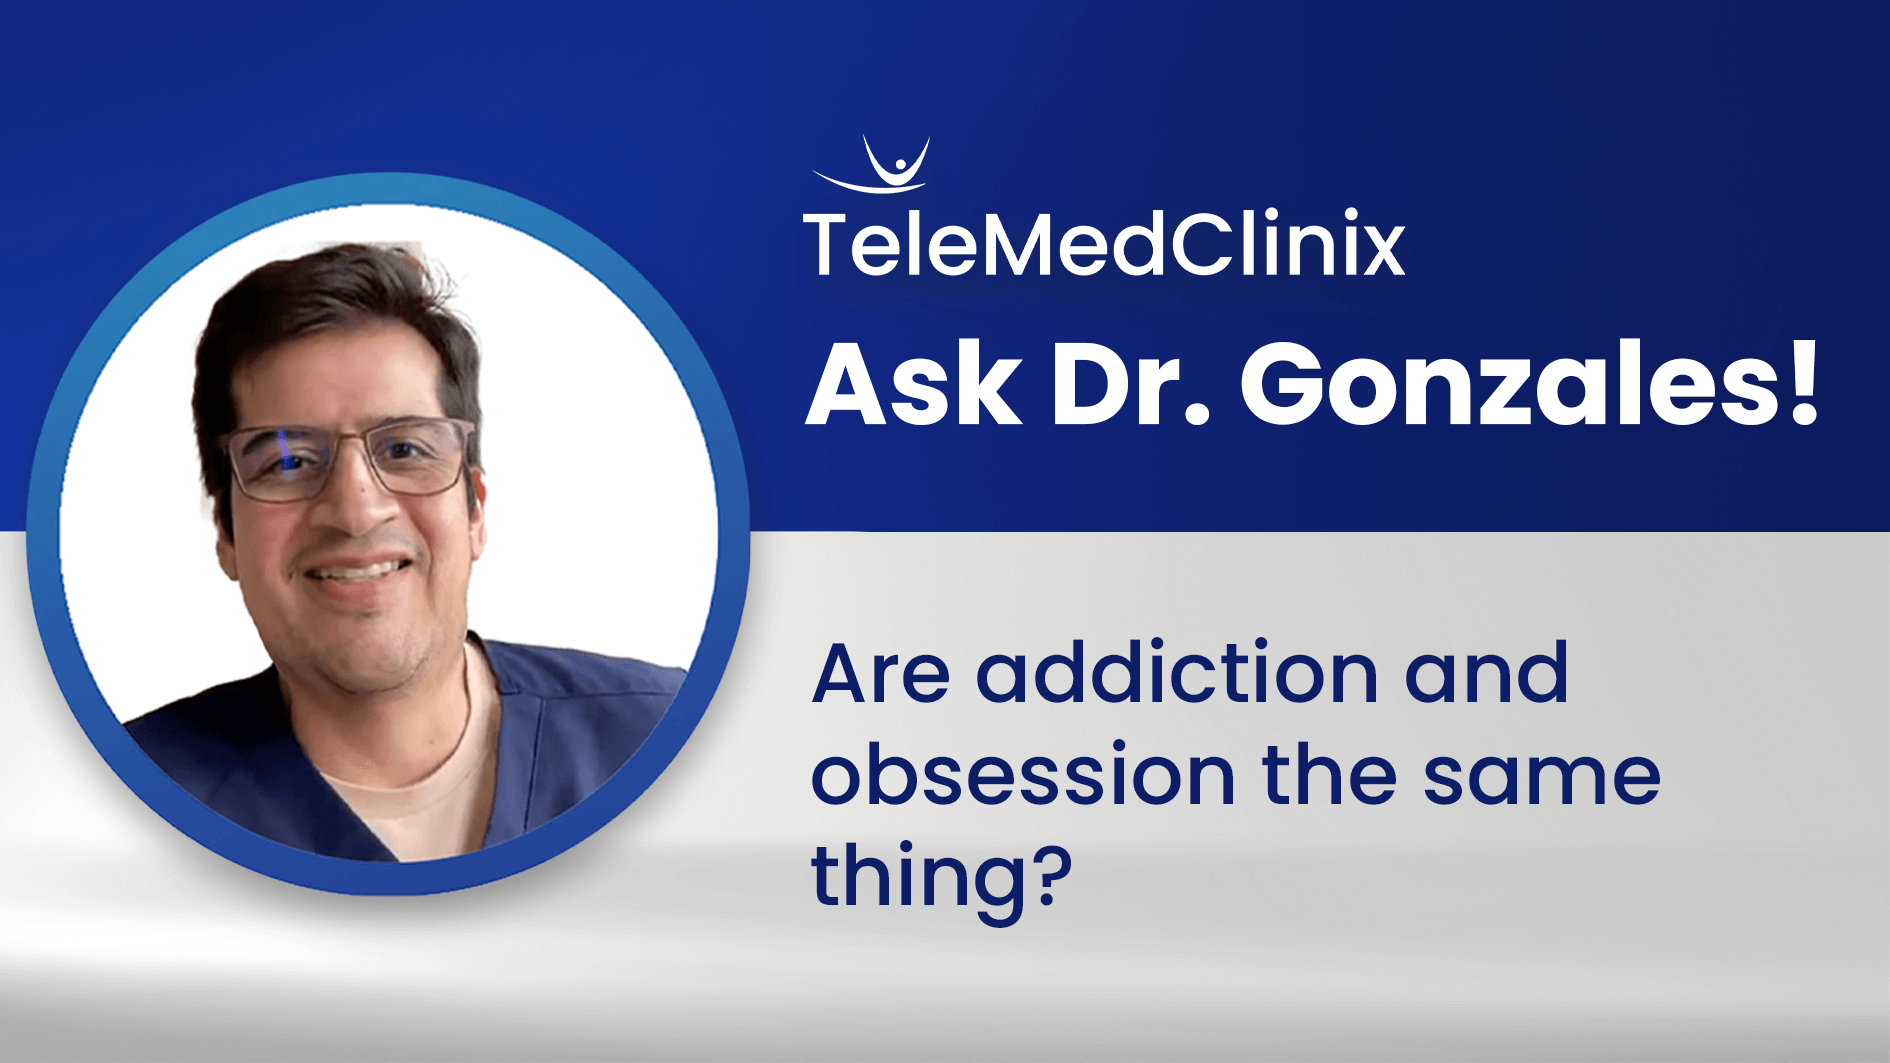 Are addiction and obsession the same thing?